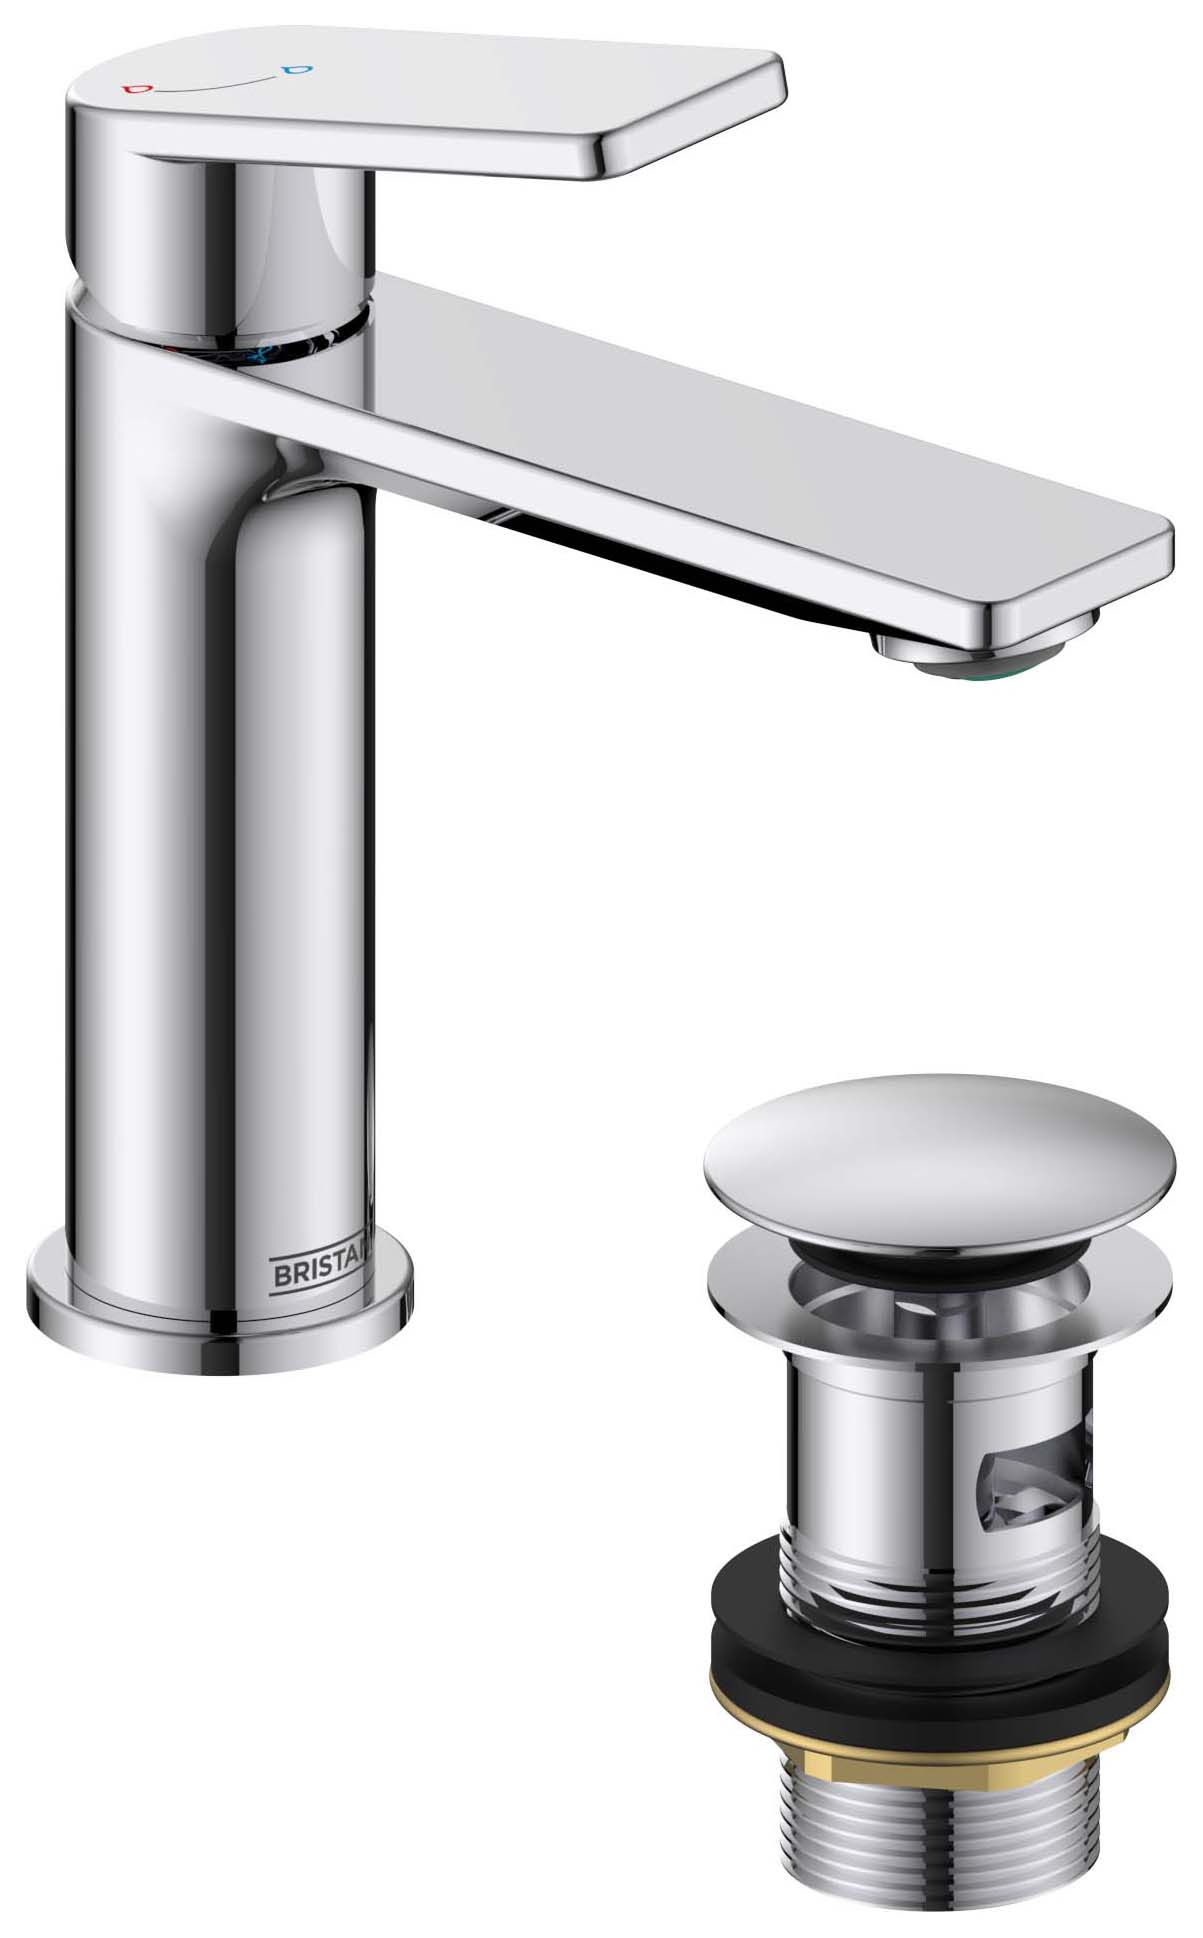 Image of Bristan Frammento Eco Start Basin Mixer with Clicker Waste - Chrome